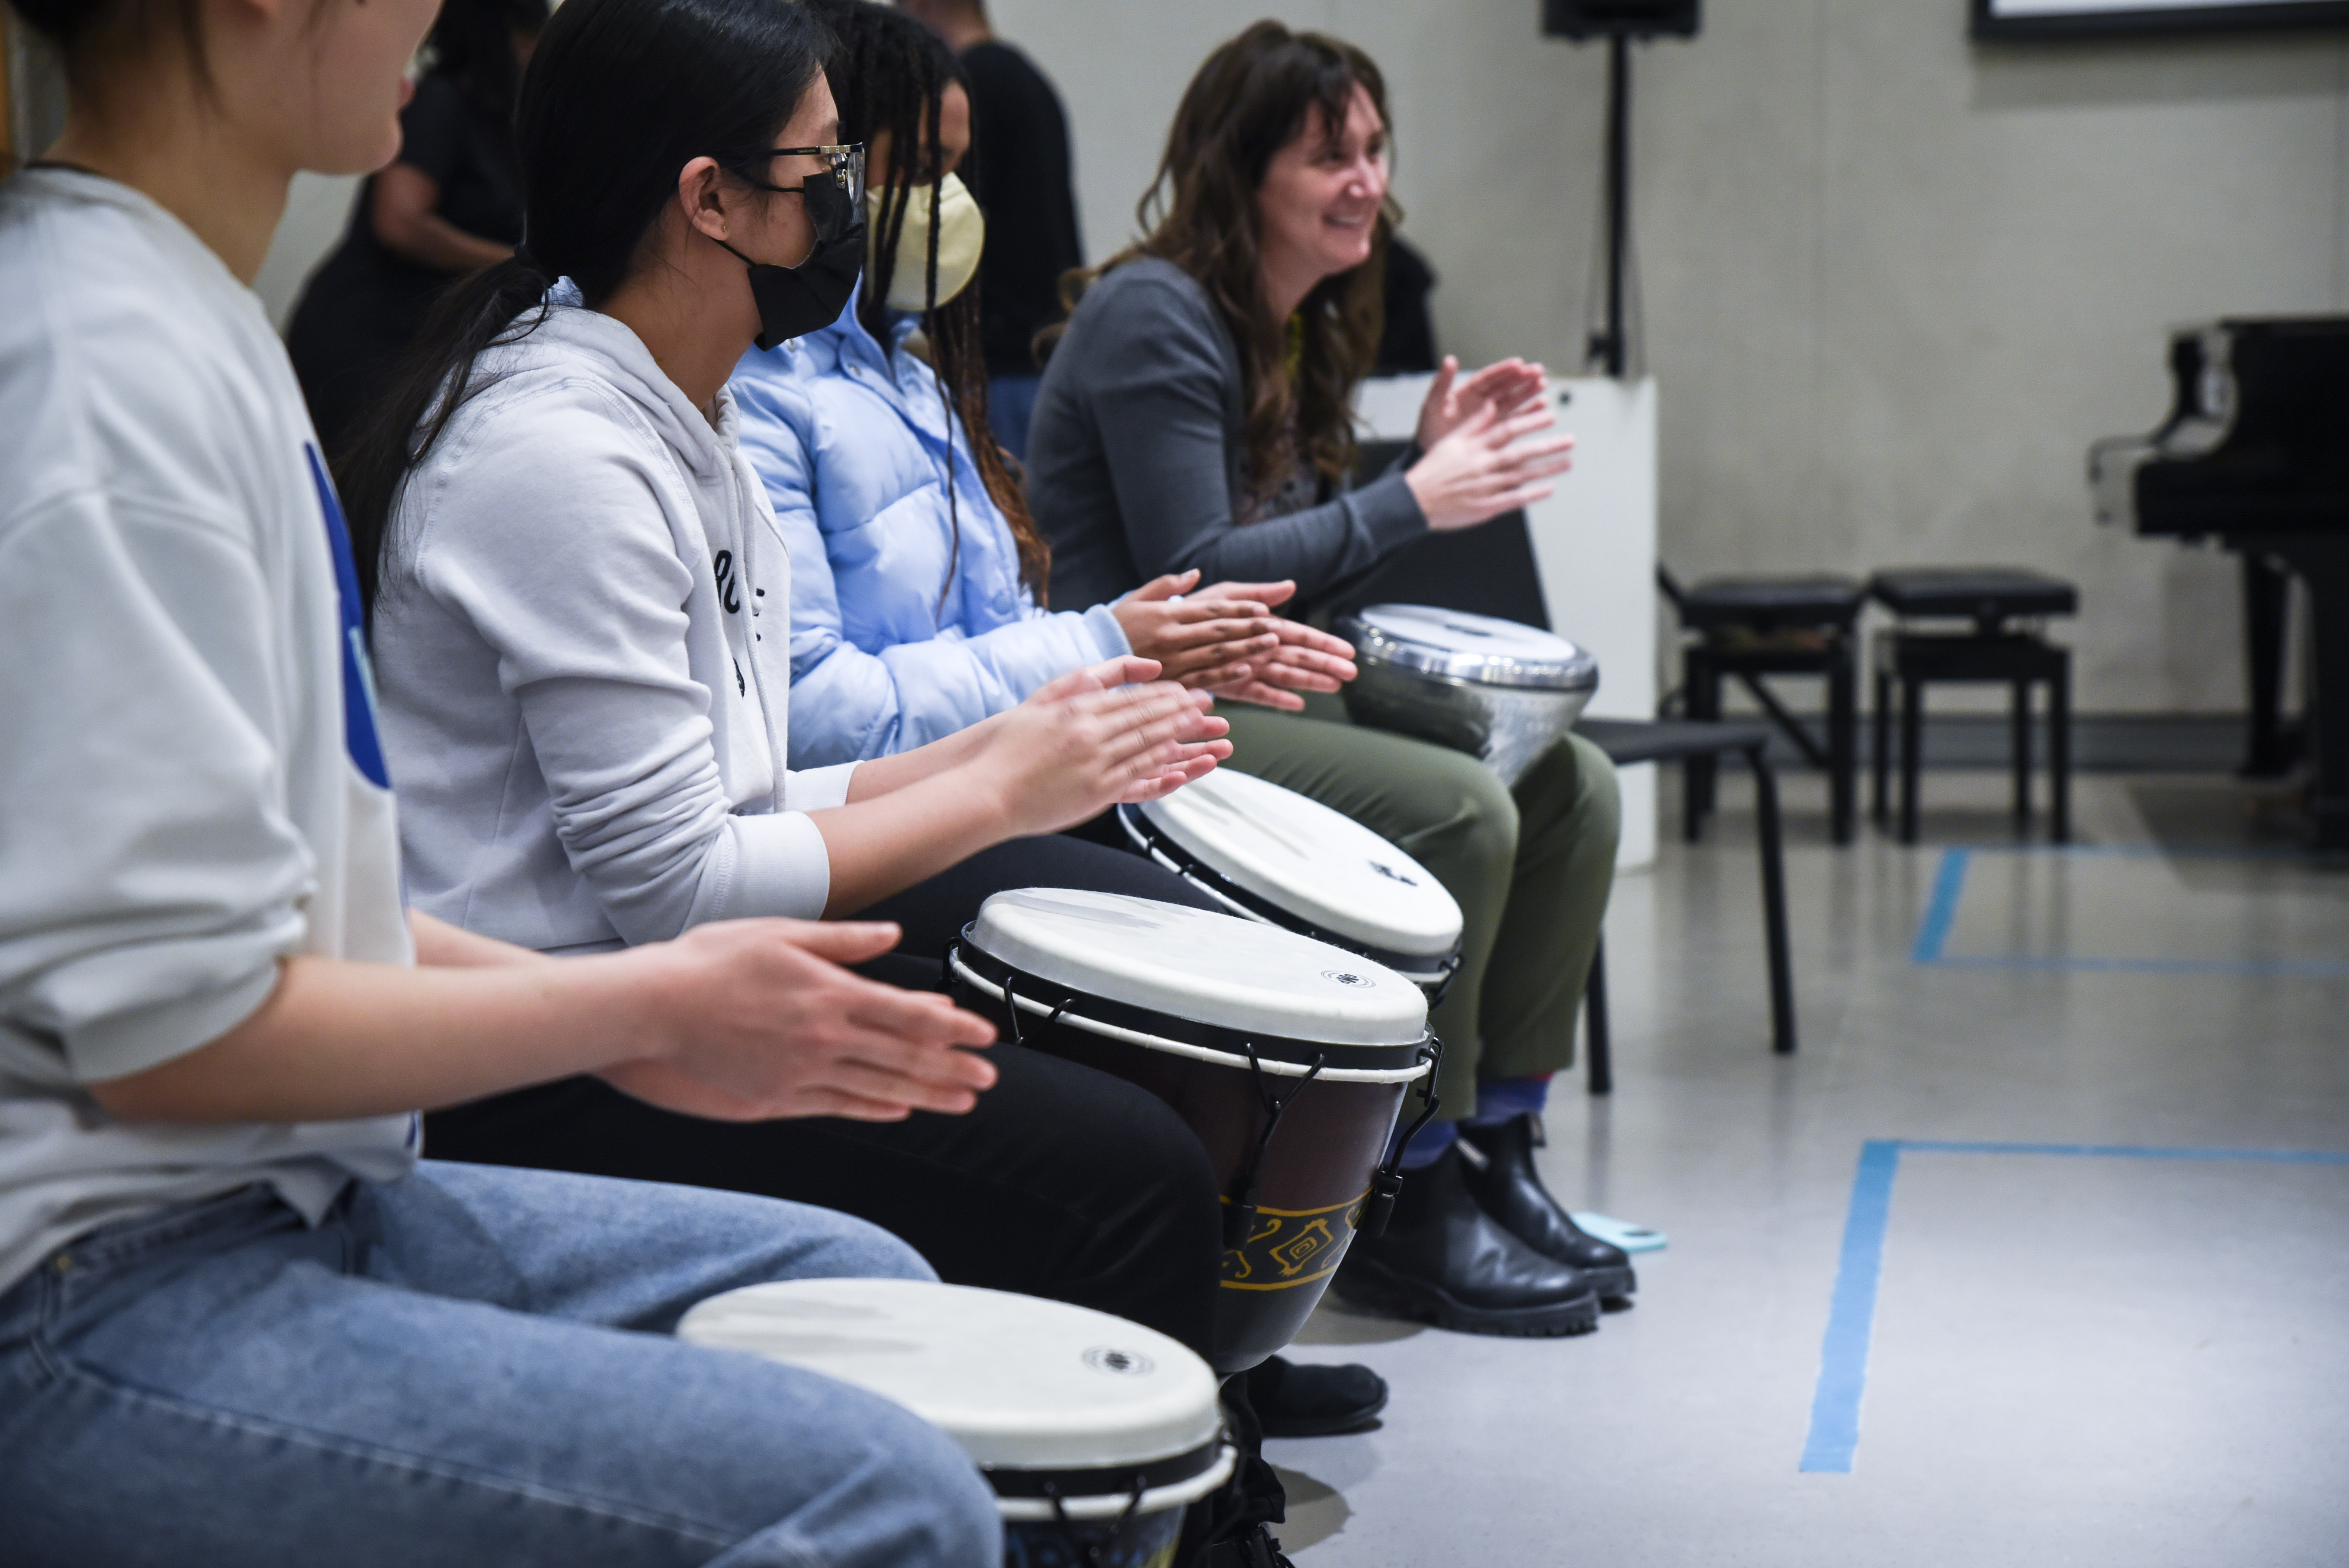 Participants hand drumming in a line